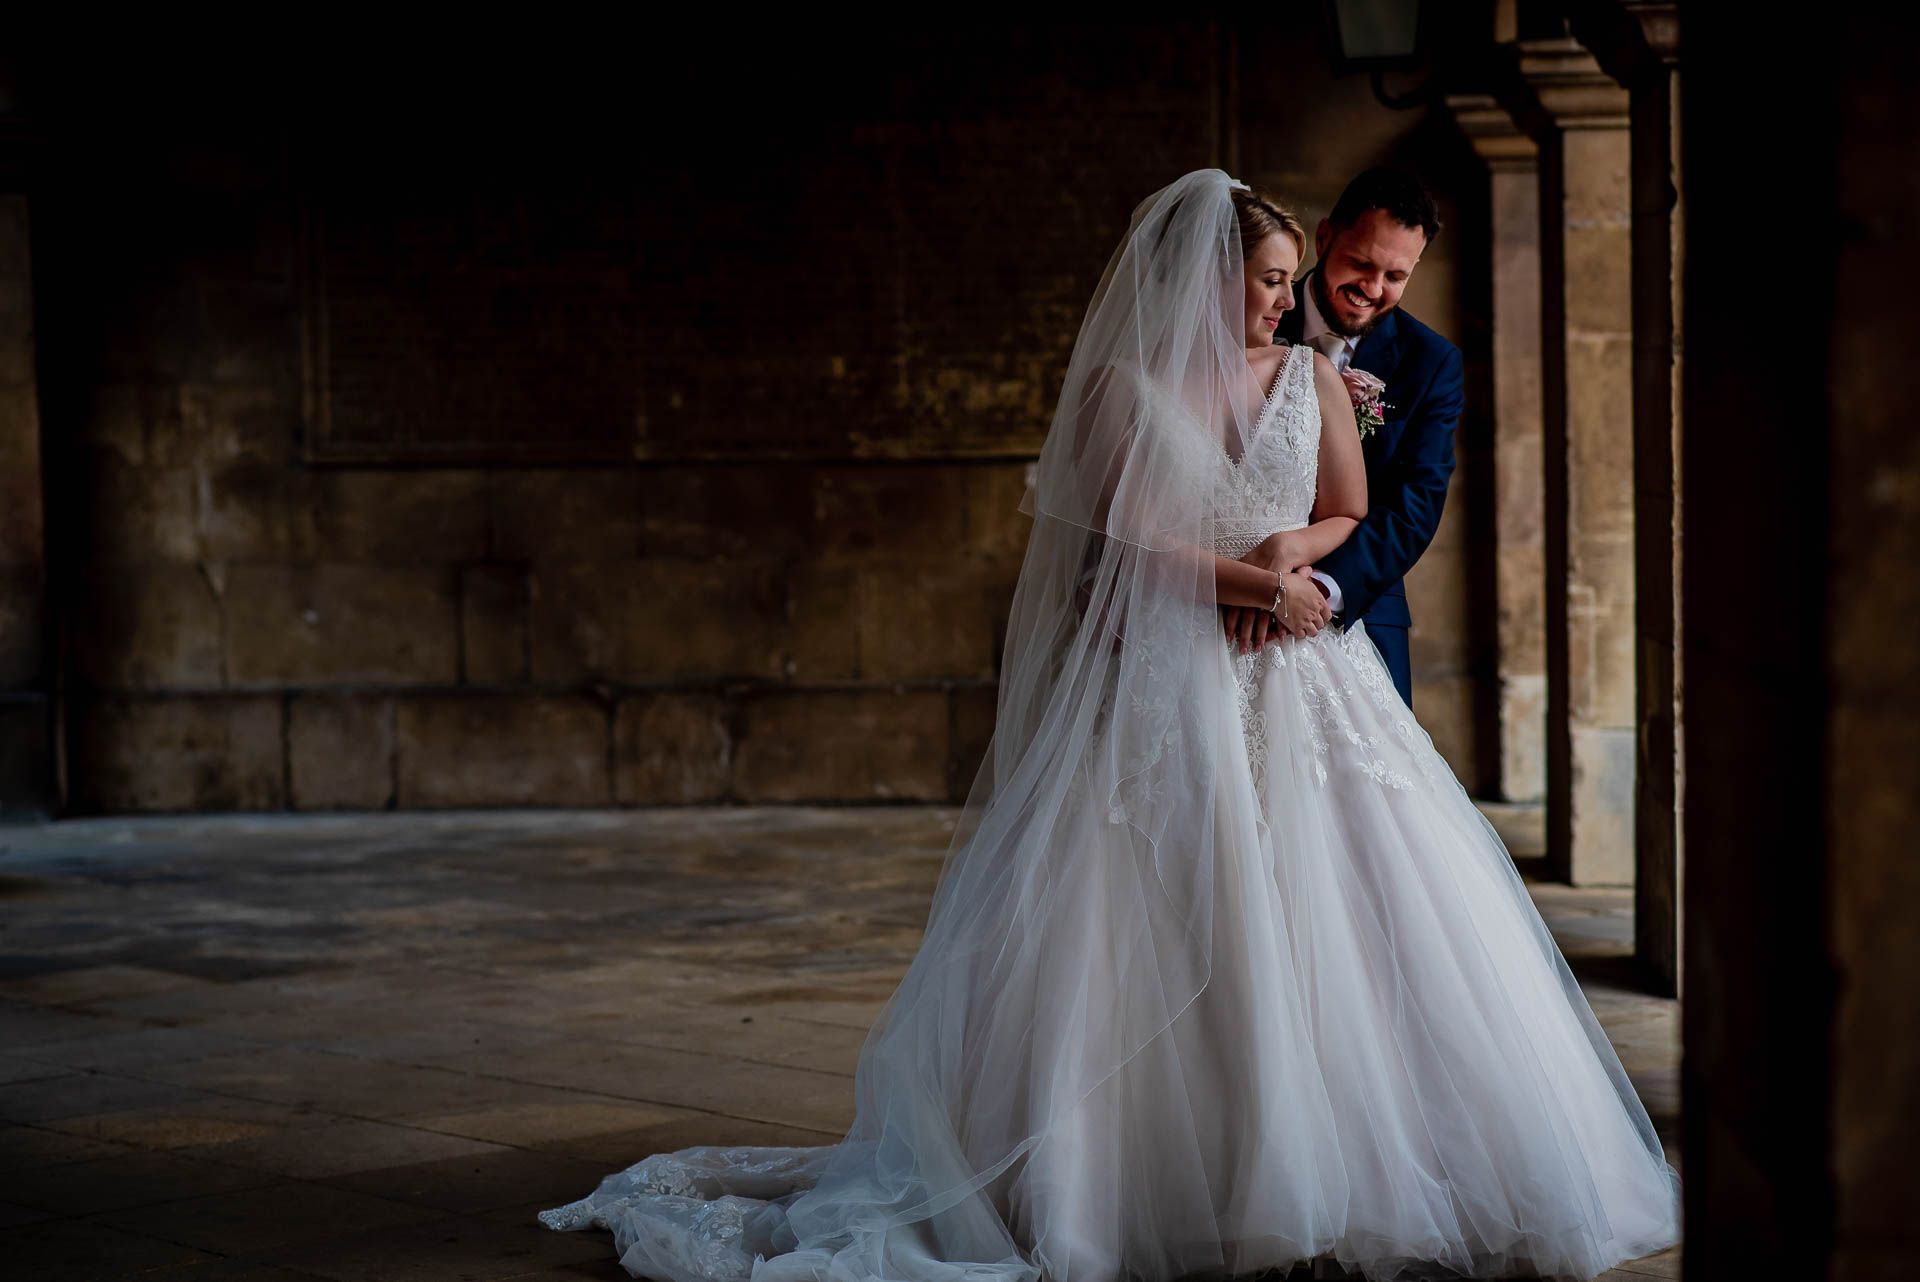 Leah and Nic in the courtyard of Emmanuel College, Cambridge University. Arms around each other and smiling. Photo by Damien Vickers Photography. 